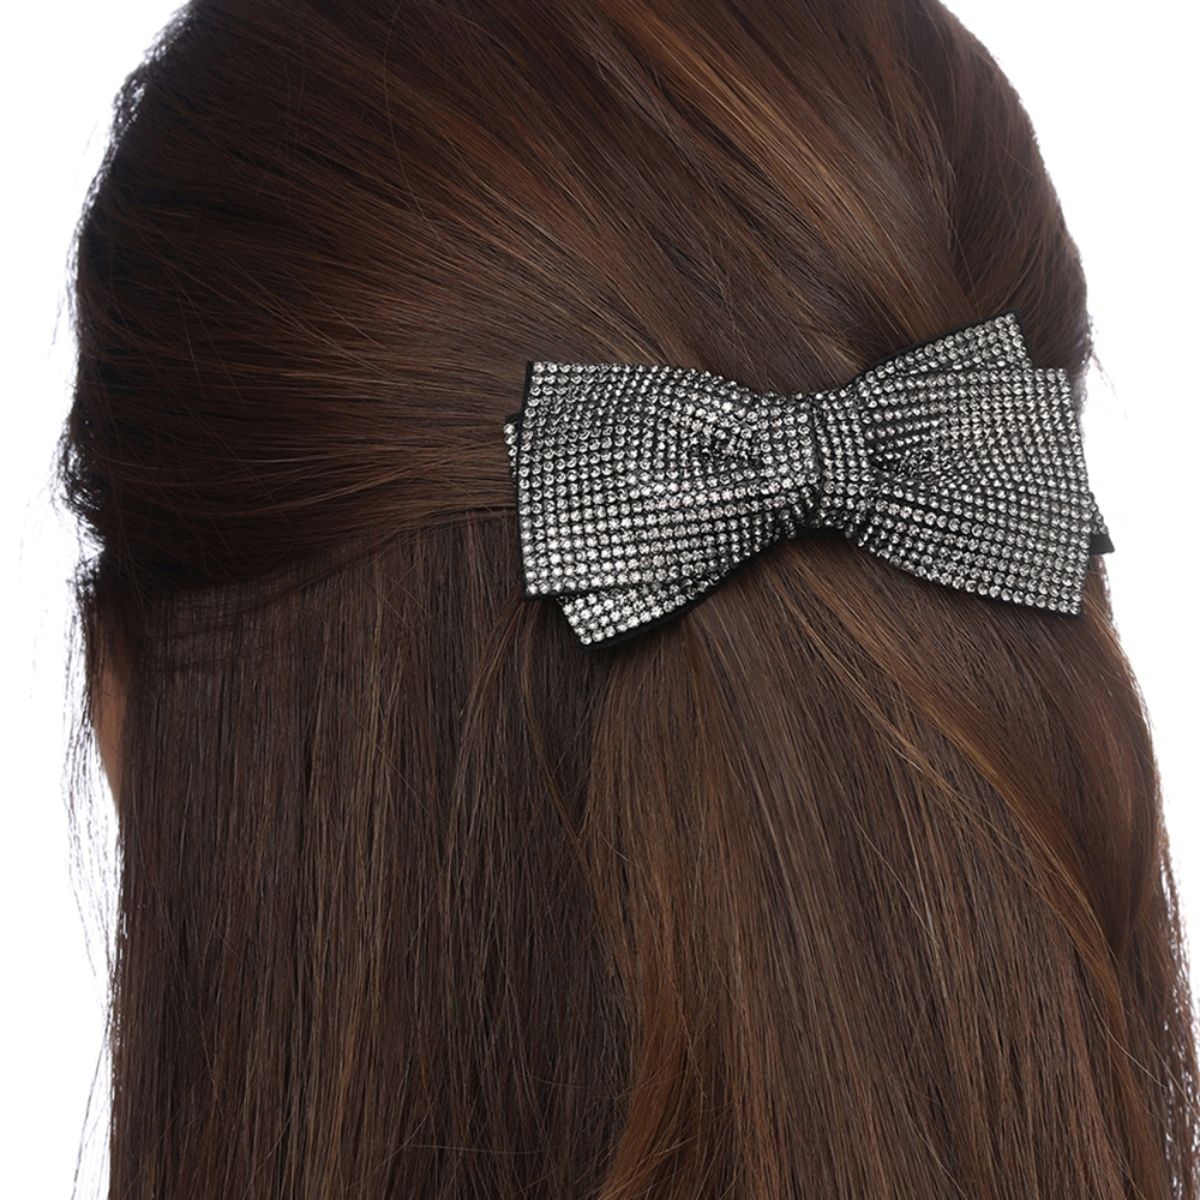 Buy Black Extra Large Hair Bow  6 6 Inch Girls Hair Bows  Online in India   Etsy